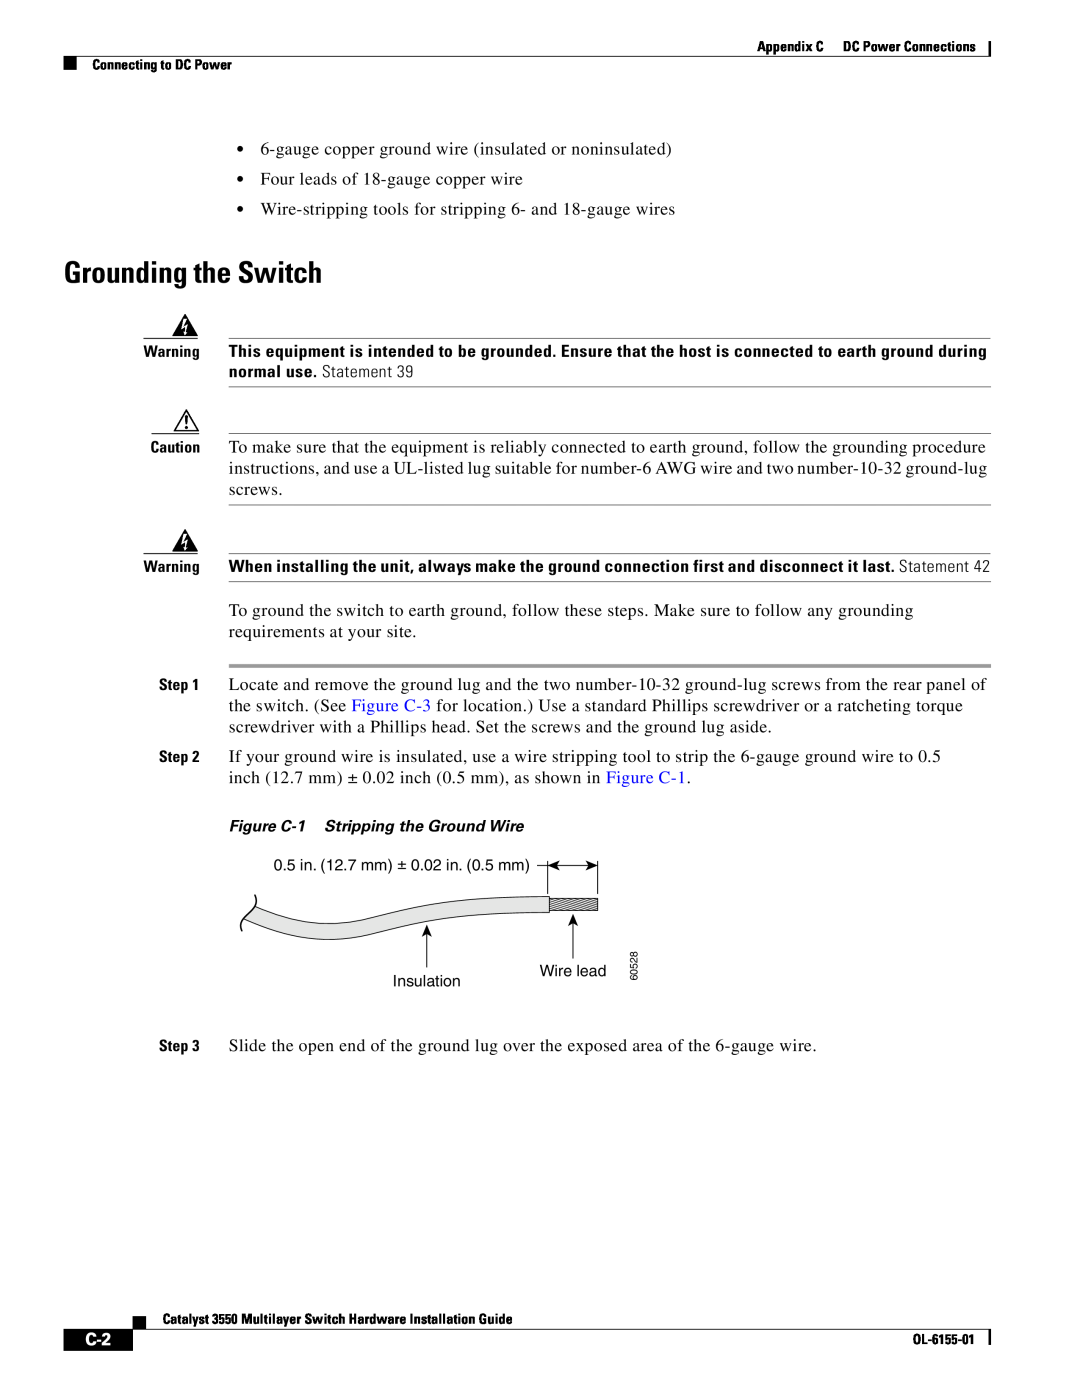 Cisco Systems 3550 manual Grounding the Switch 